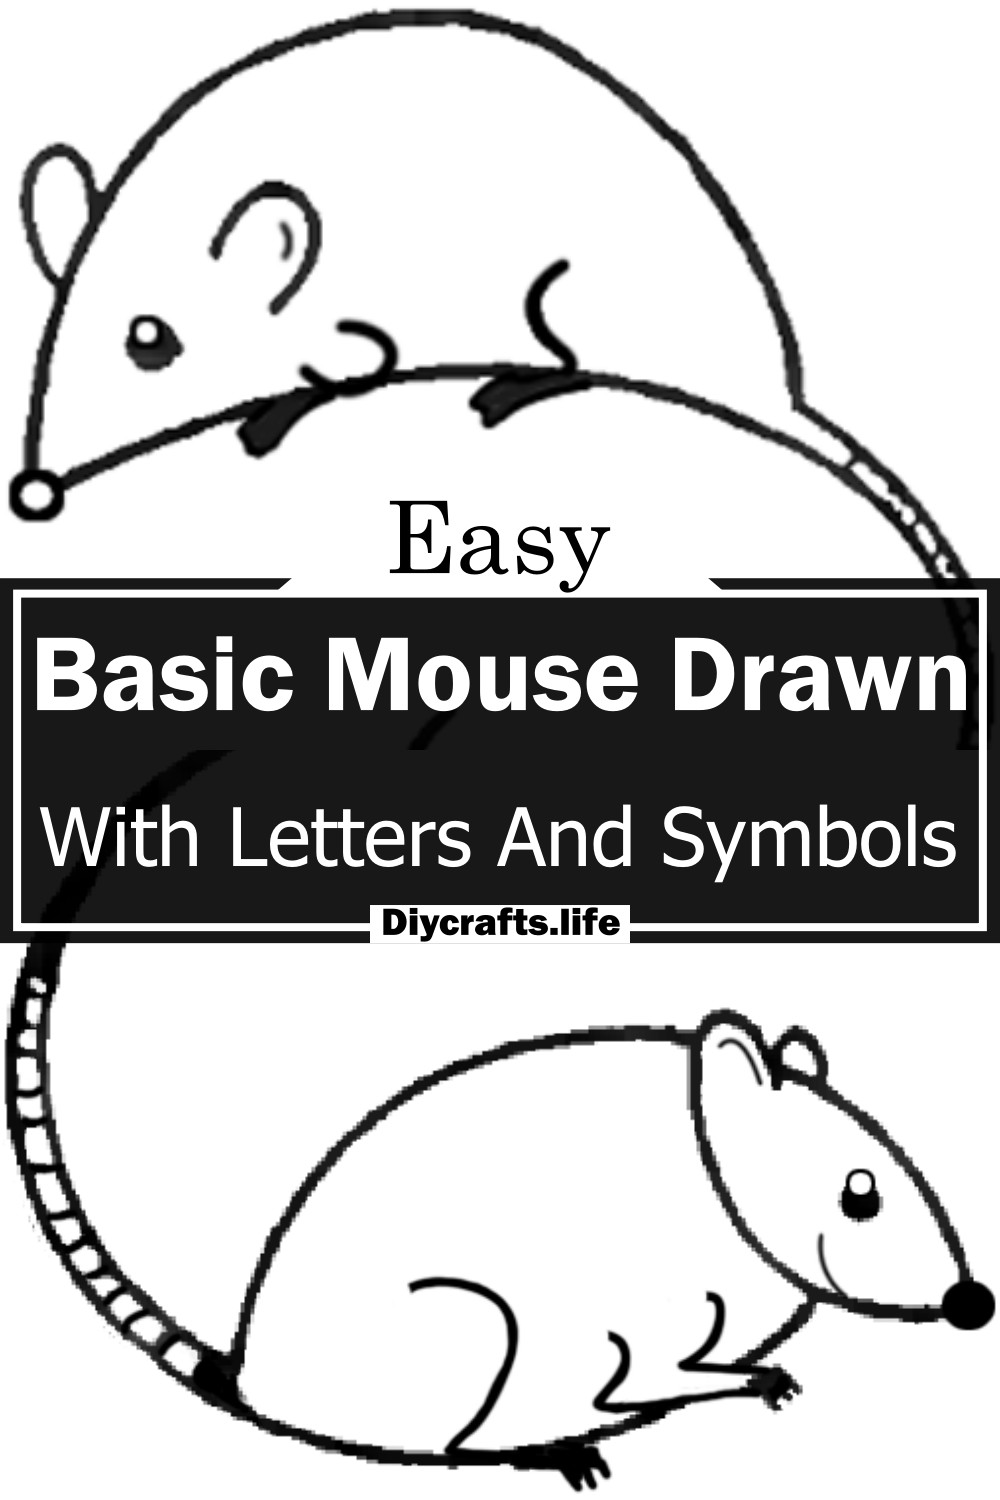 Basic Mouse Drawn With Letters And Symbols